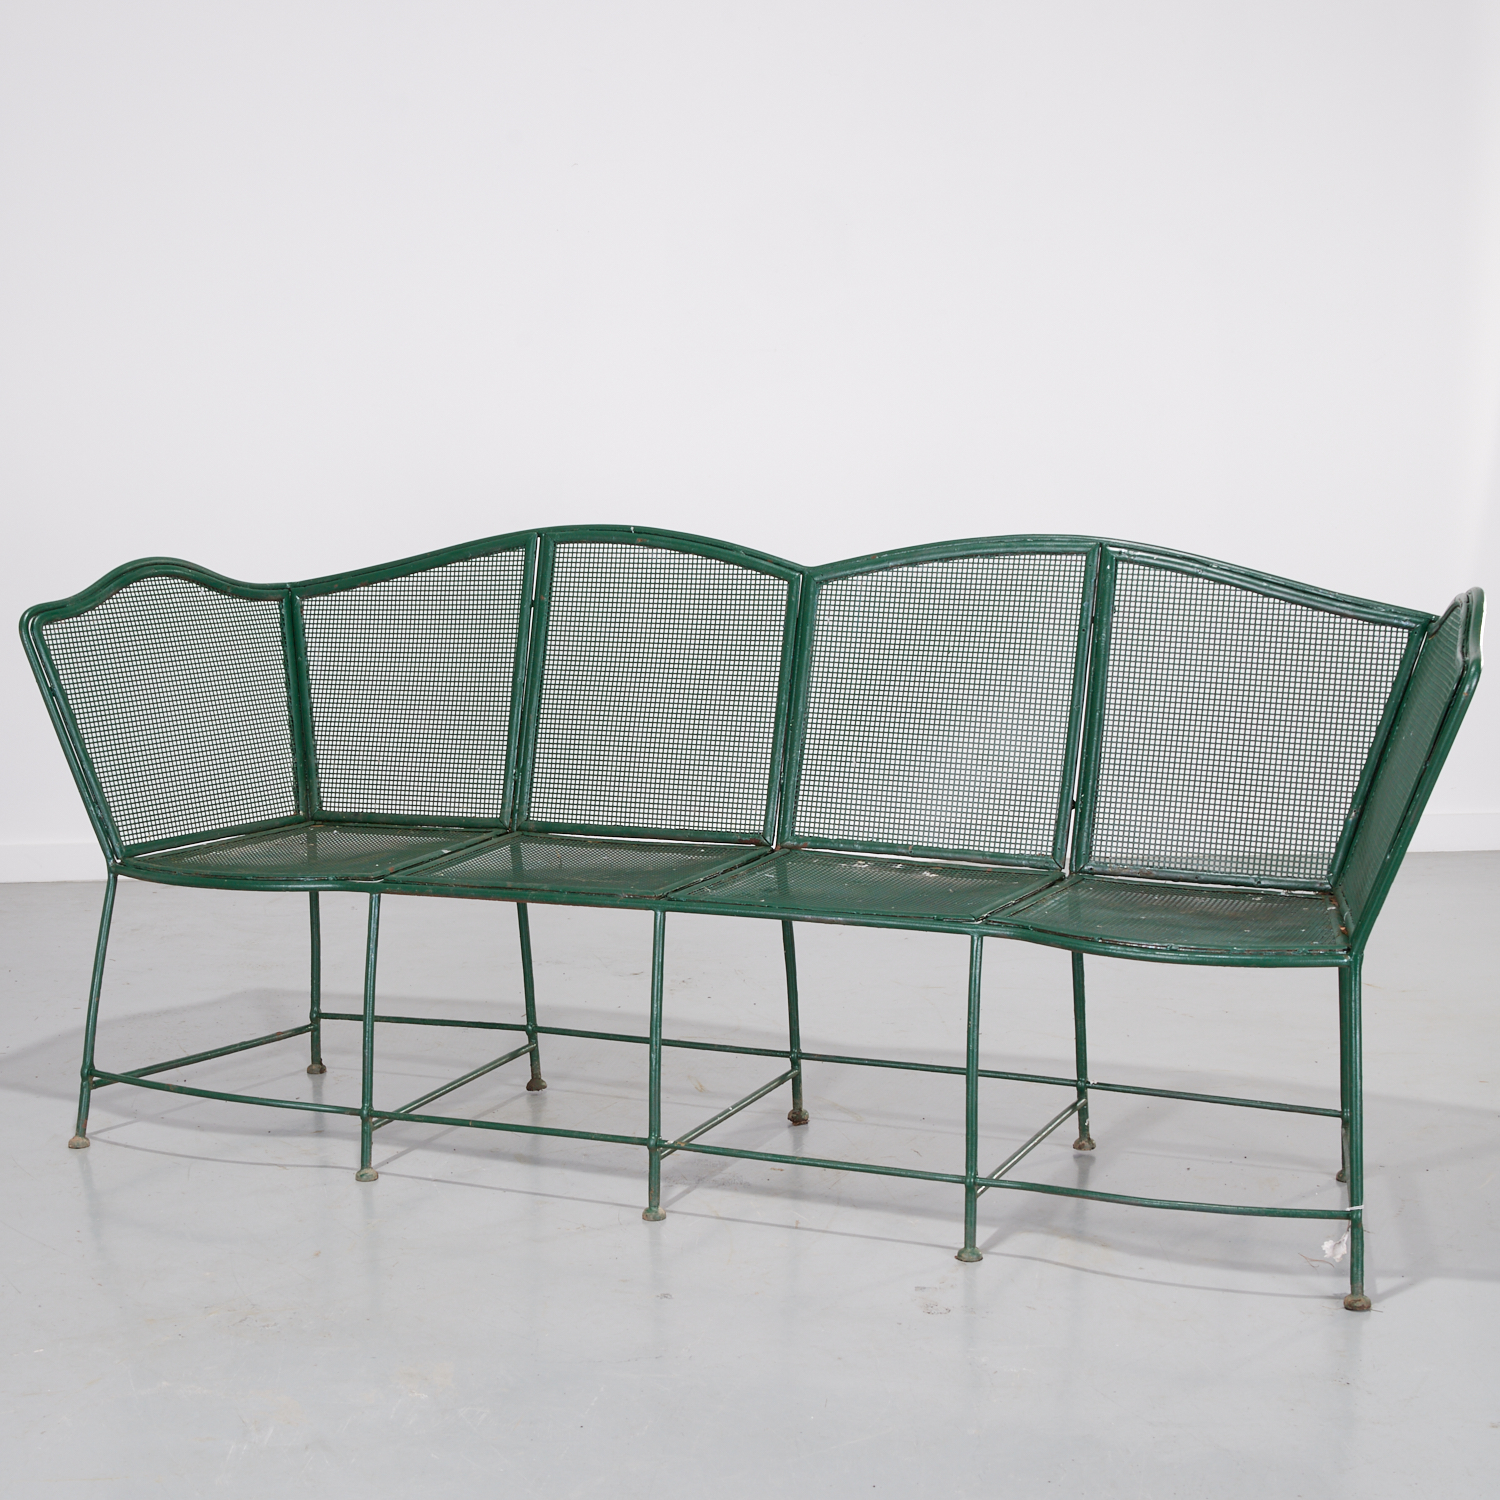 FRENCH MID CENTURY GREEN PAINTED 3ce641